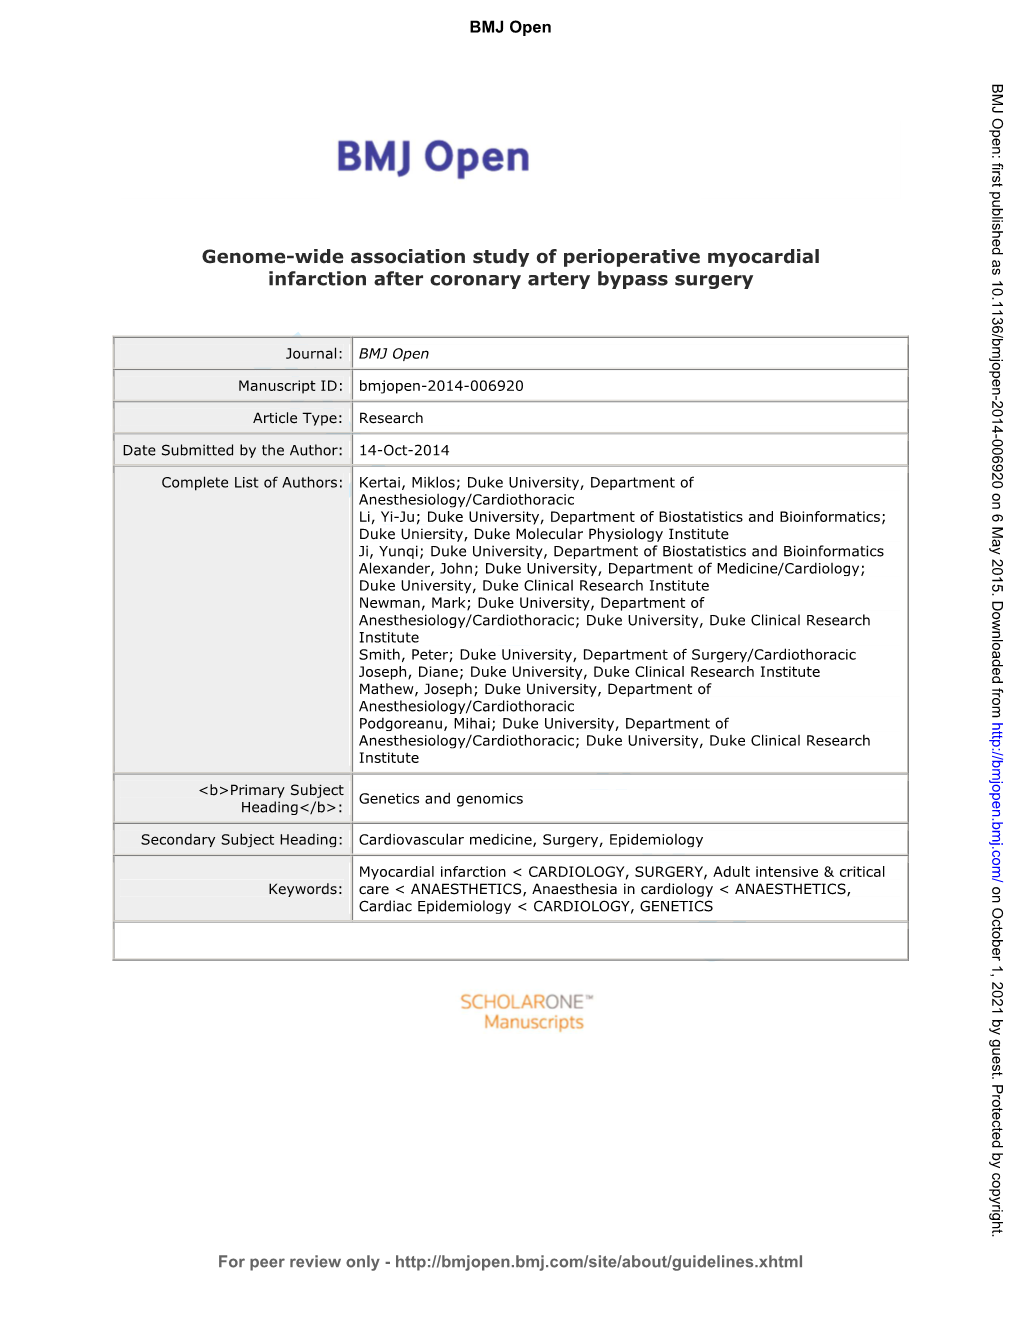 For Peer Review Only - BMJ Open: First Published As 10.1136/Bmjopen-2014-006920 on 6 May 2015